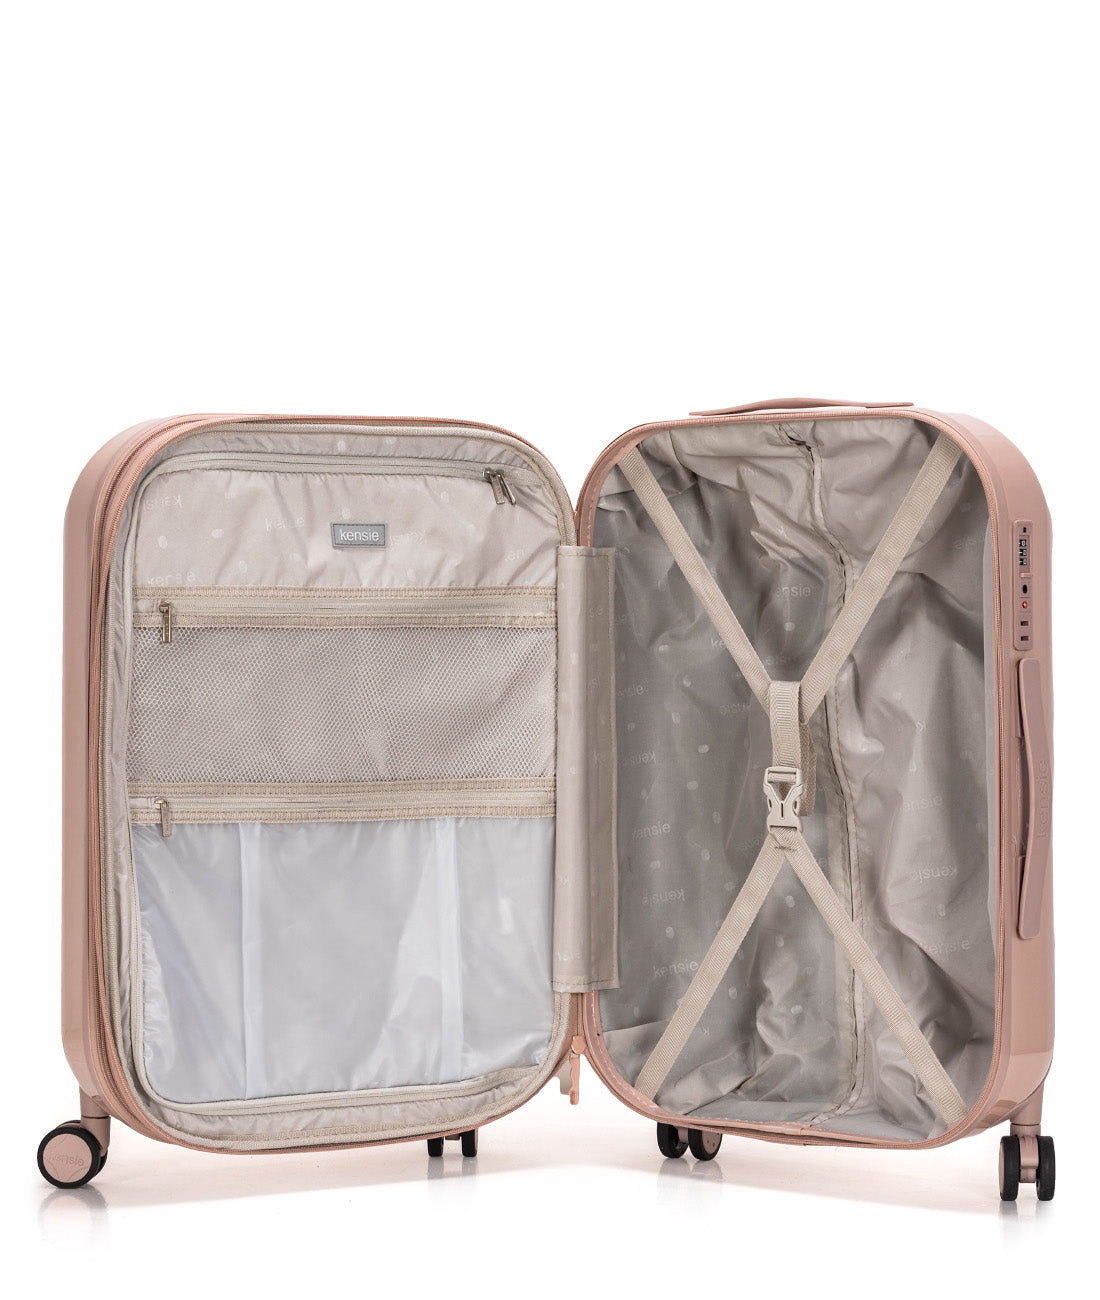 Kensie | Enchanted Collection | 3PC Luggage Set